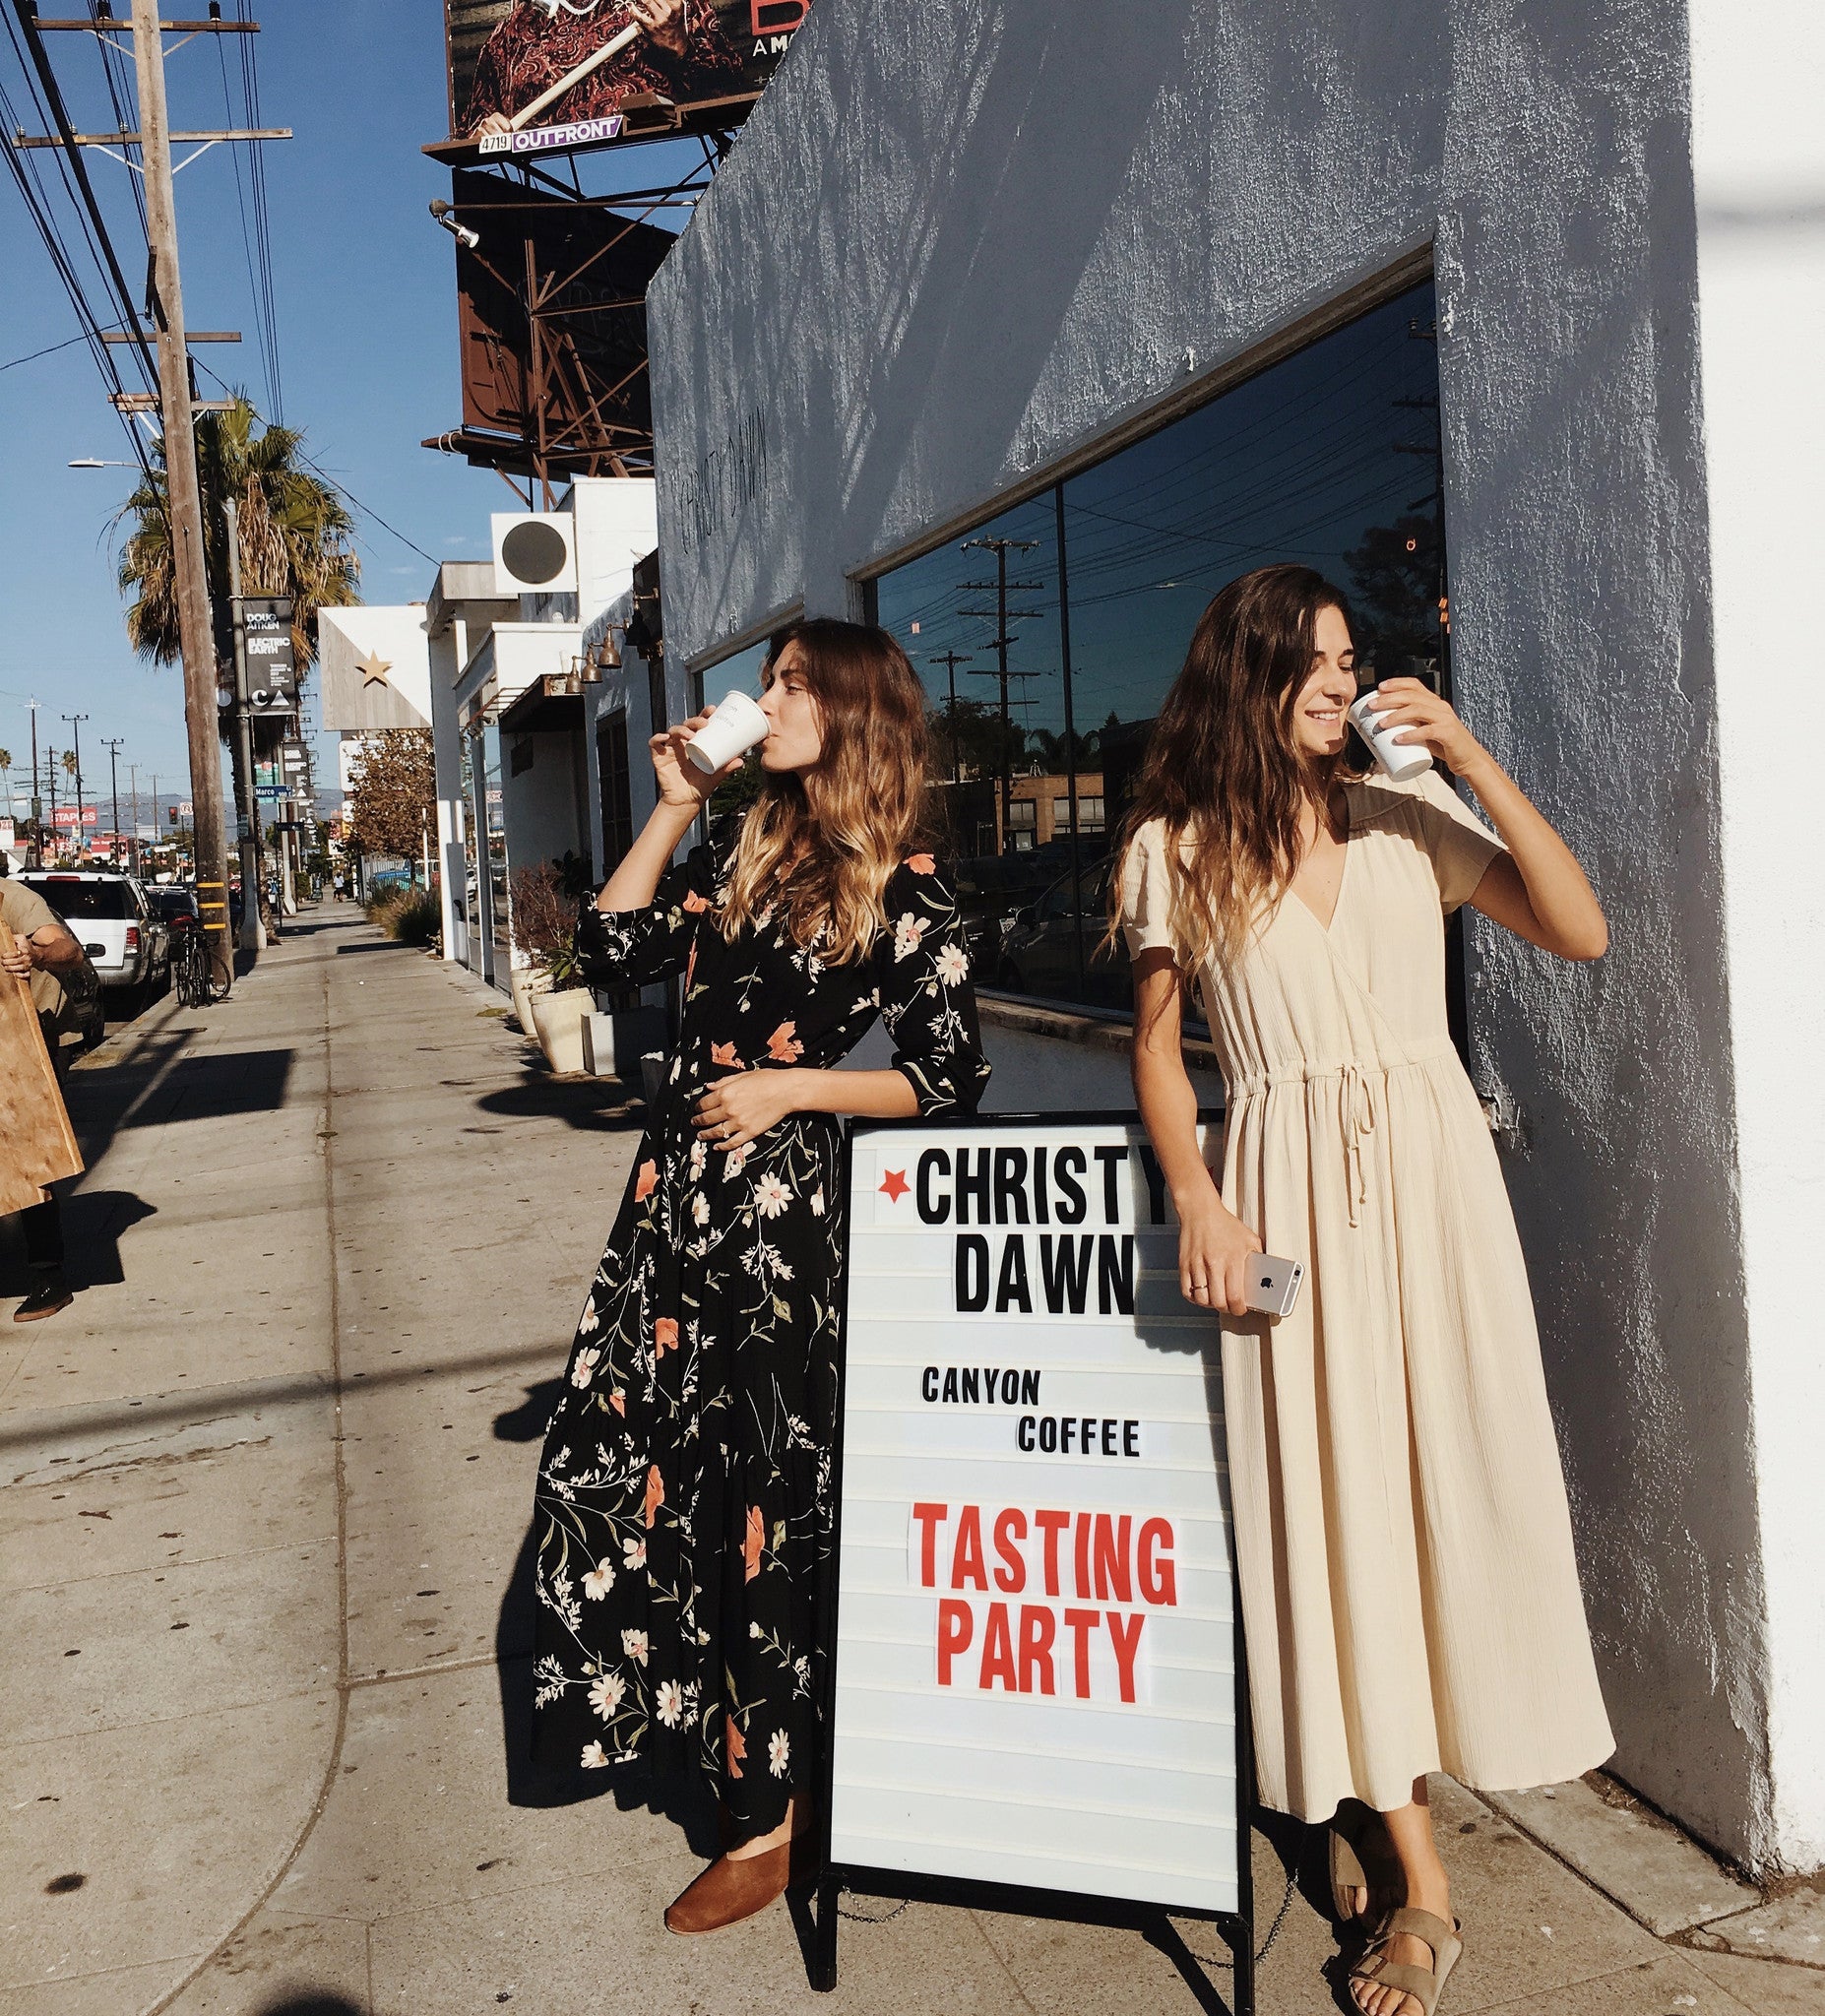 Canyon Coffee Pop-Up Launch At Christy Dawn in Venice, CA